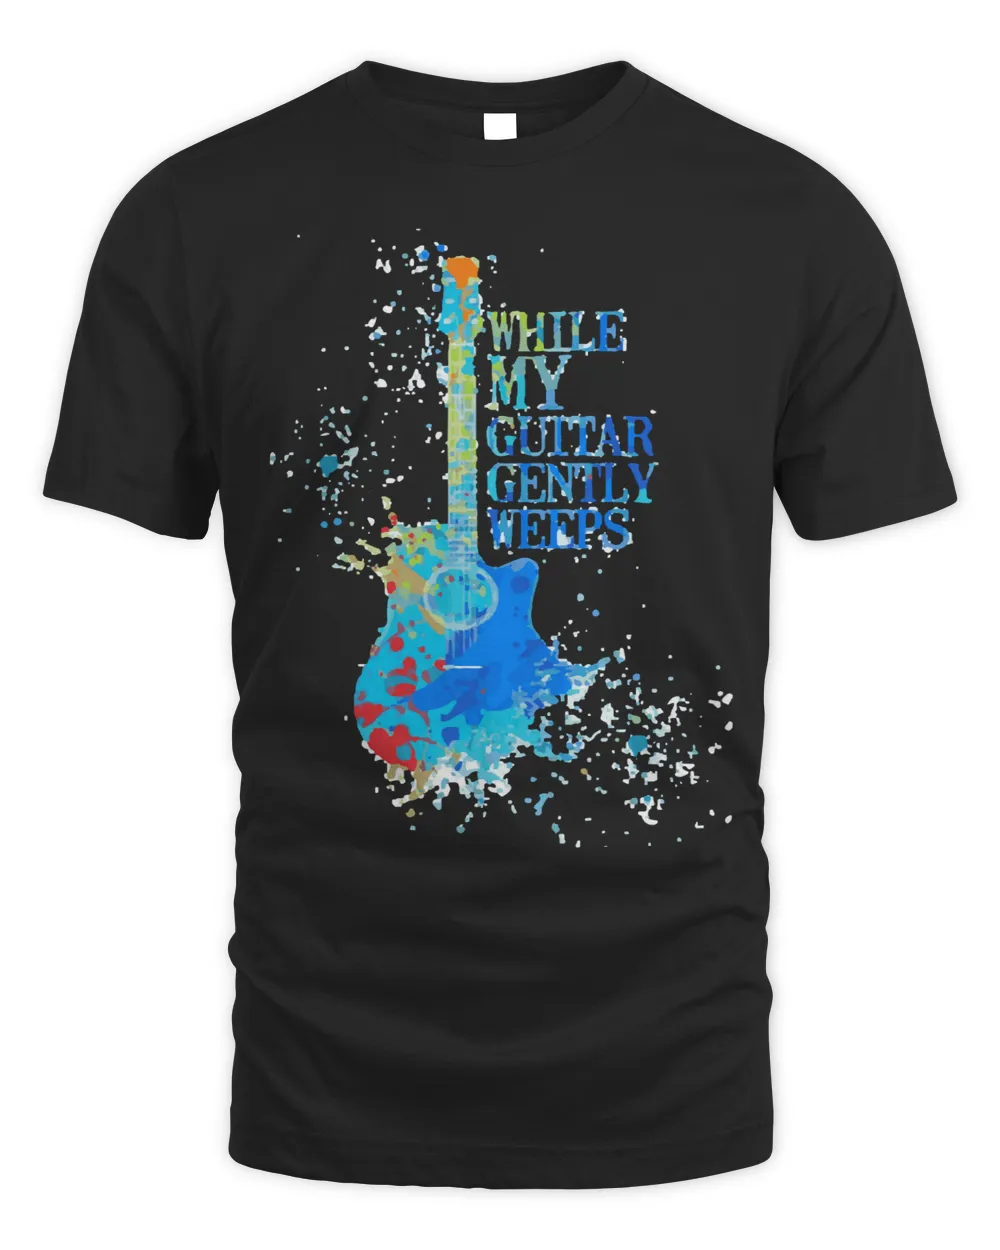 Guitar Guitarist While My Guitar Gently Weeps Design 125 musician Music